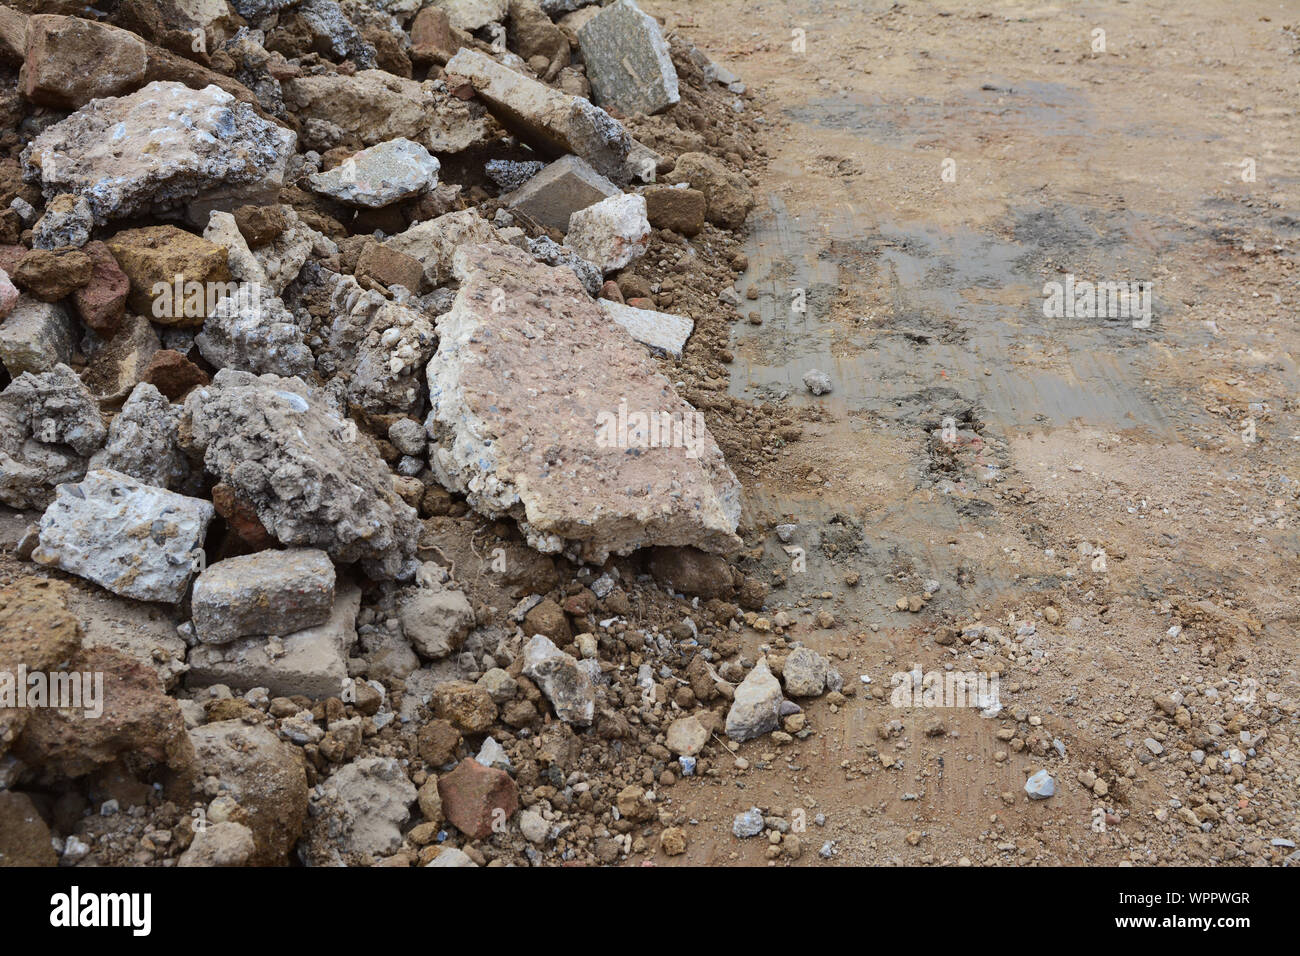 Large broken pieces of rough concrete, bricks and paving slabs next to smooth excavated ground with copy space Stock Photo